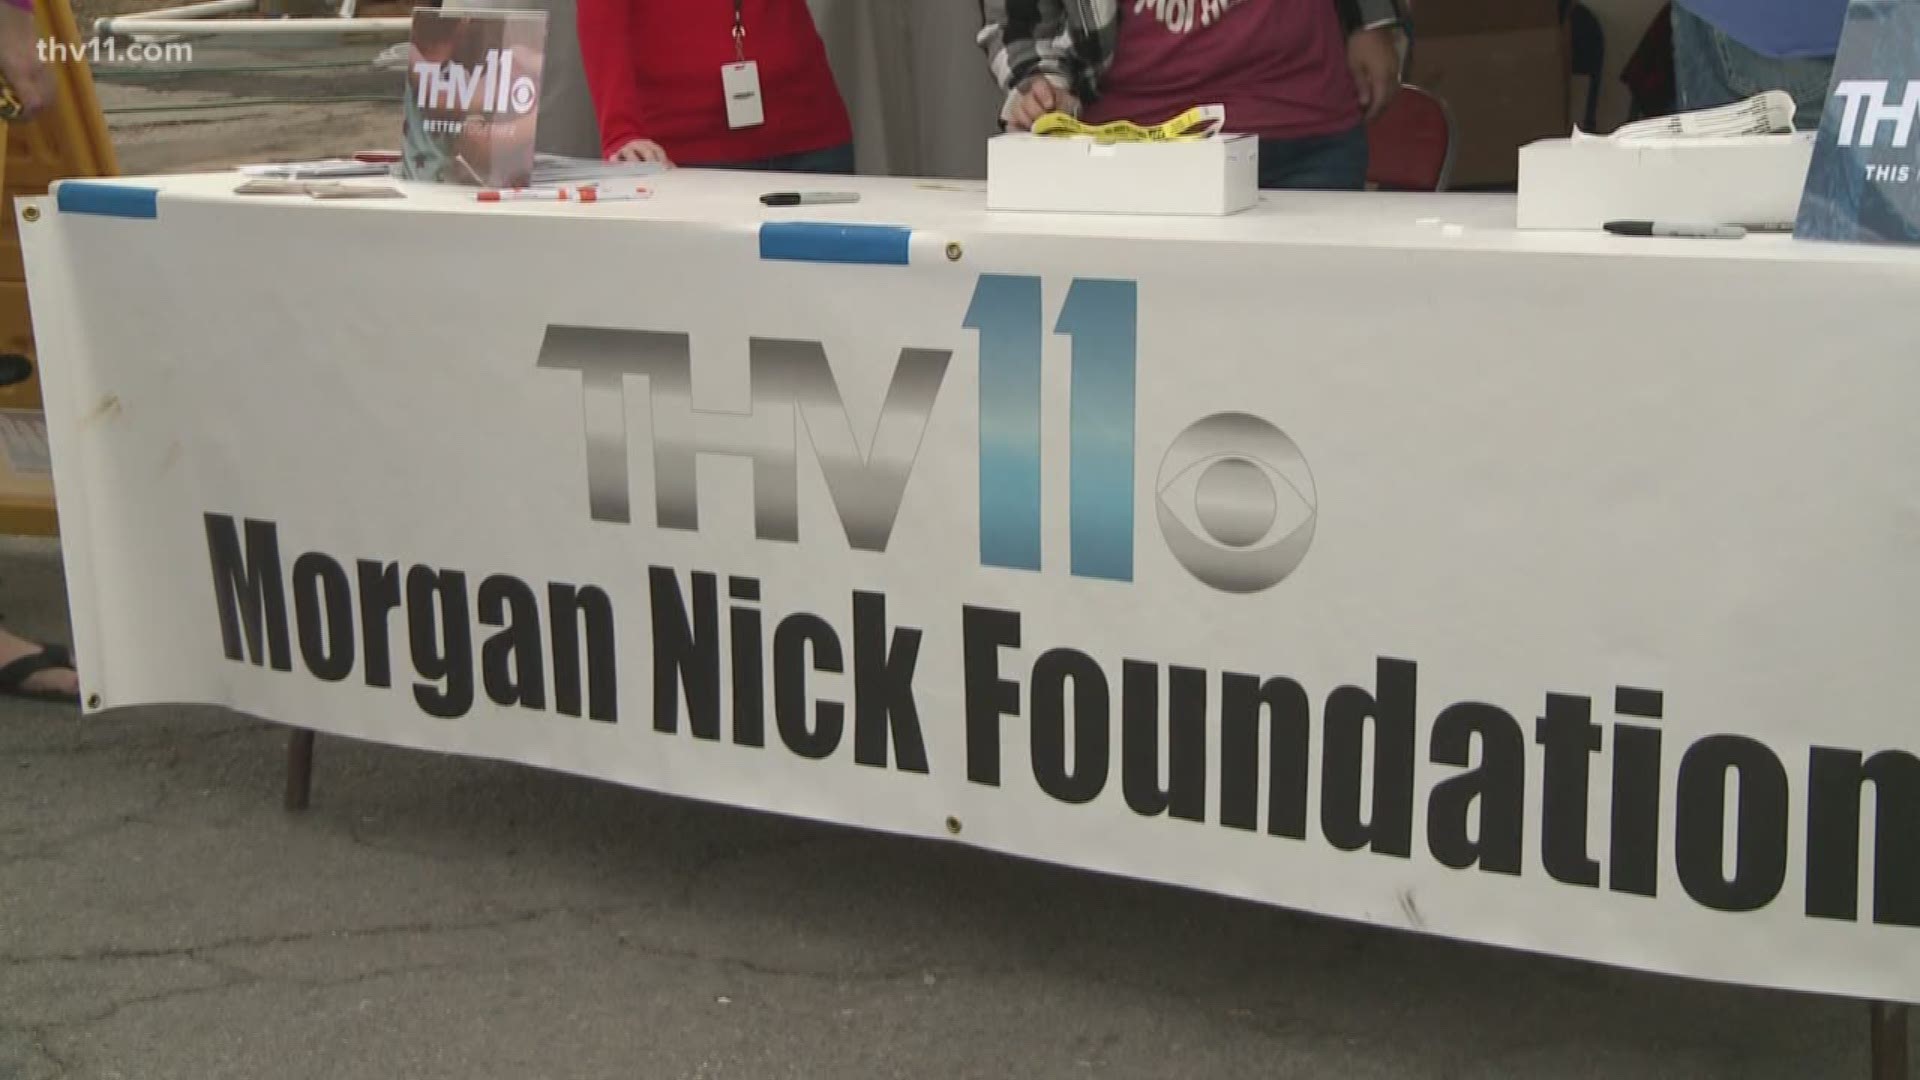 The Morgan Nick Foundation announced a new expansion, making room for more staff to help bring more missing people home. Colleen Nick explains why it's so important.